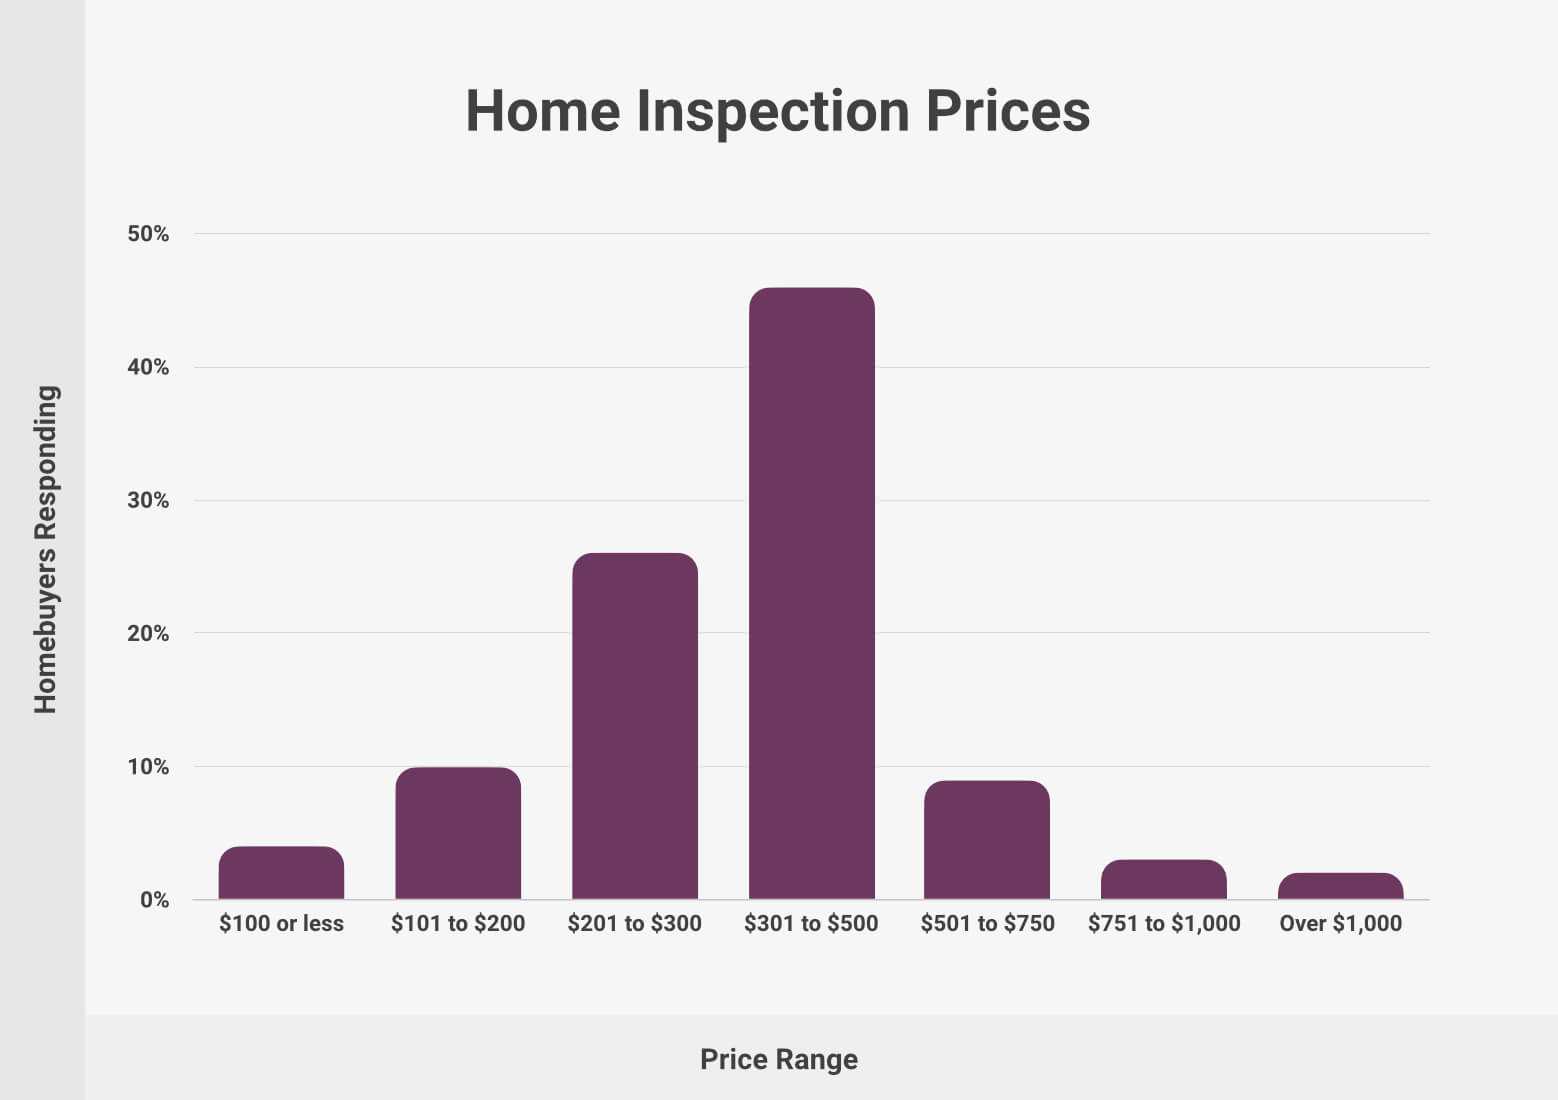 https://assets.site-static.com/userFiles/1102/image/home_inspection_statistics/Home_Inspection_Prices.jpg